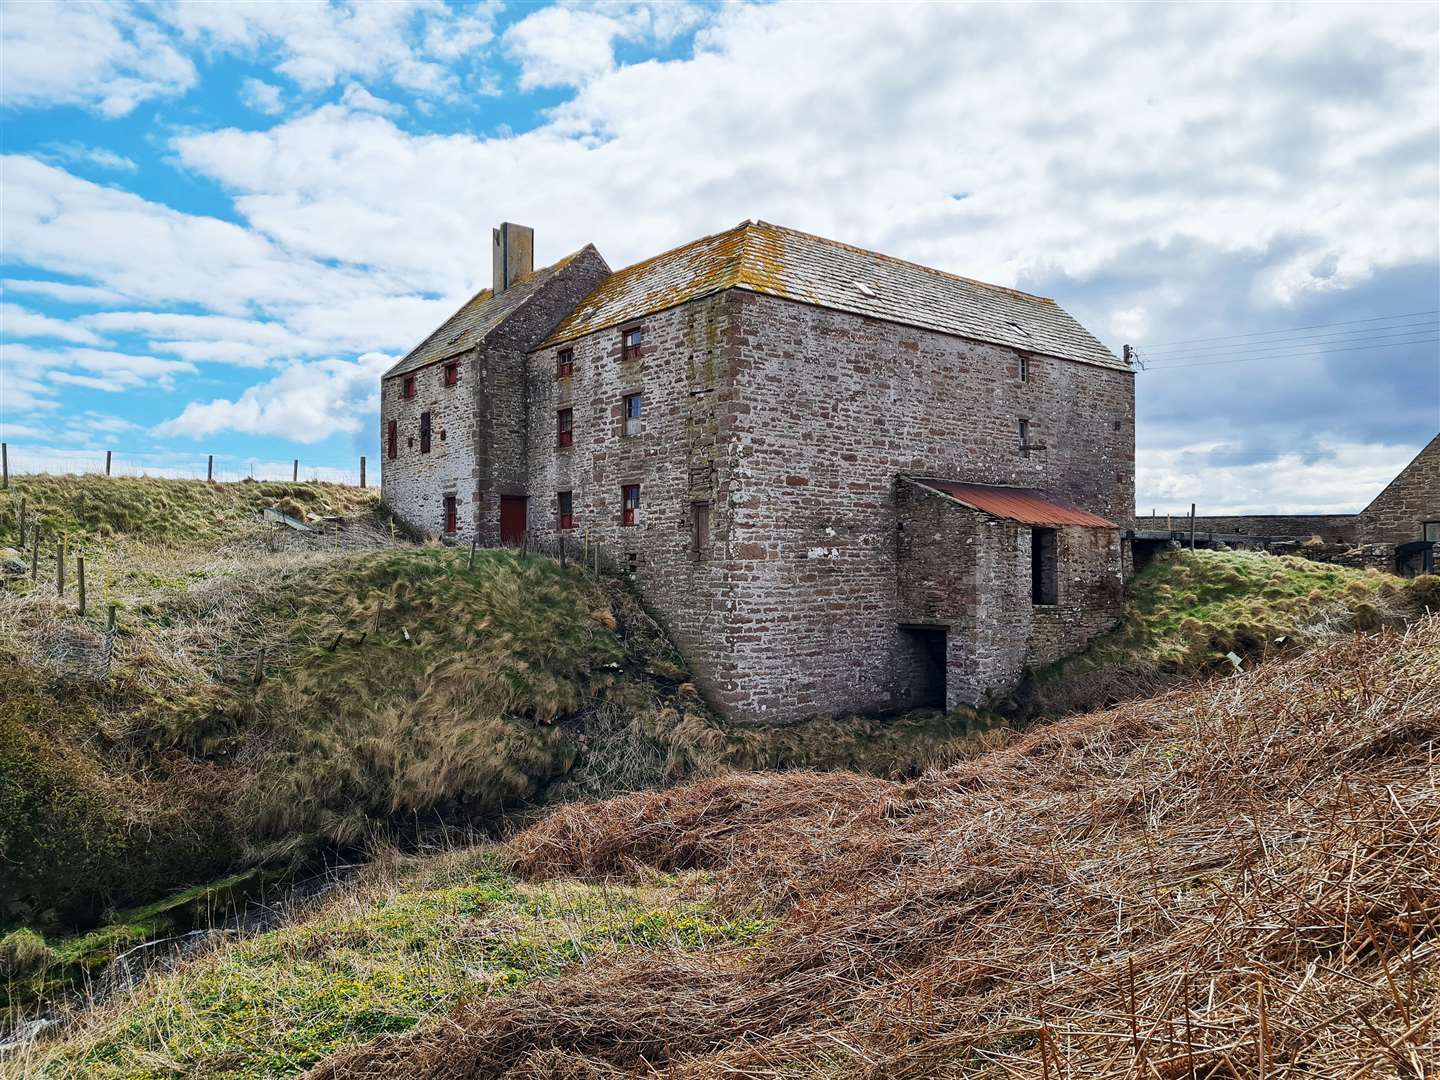 John O'Groats Mill Trust says the project to bring the mill complex back to life is founded on net-zero principles.